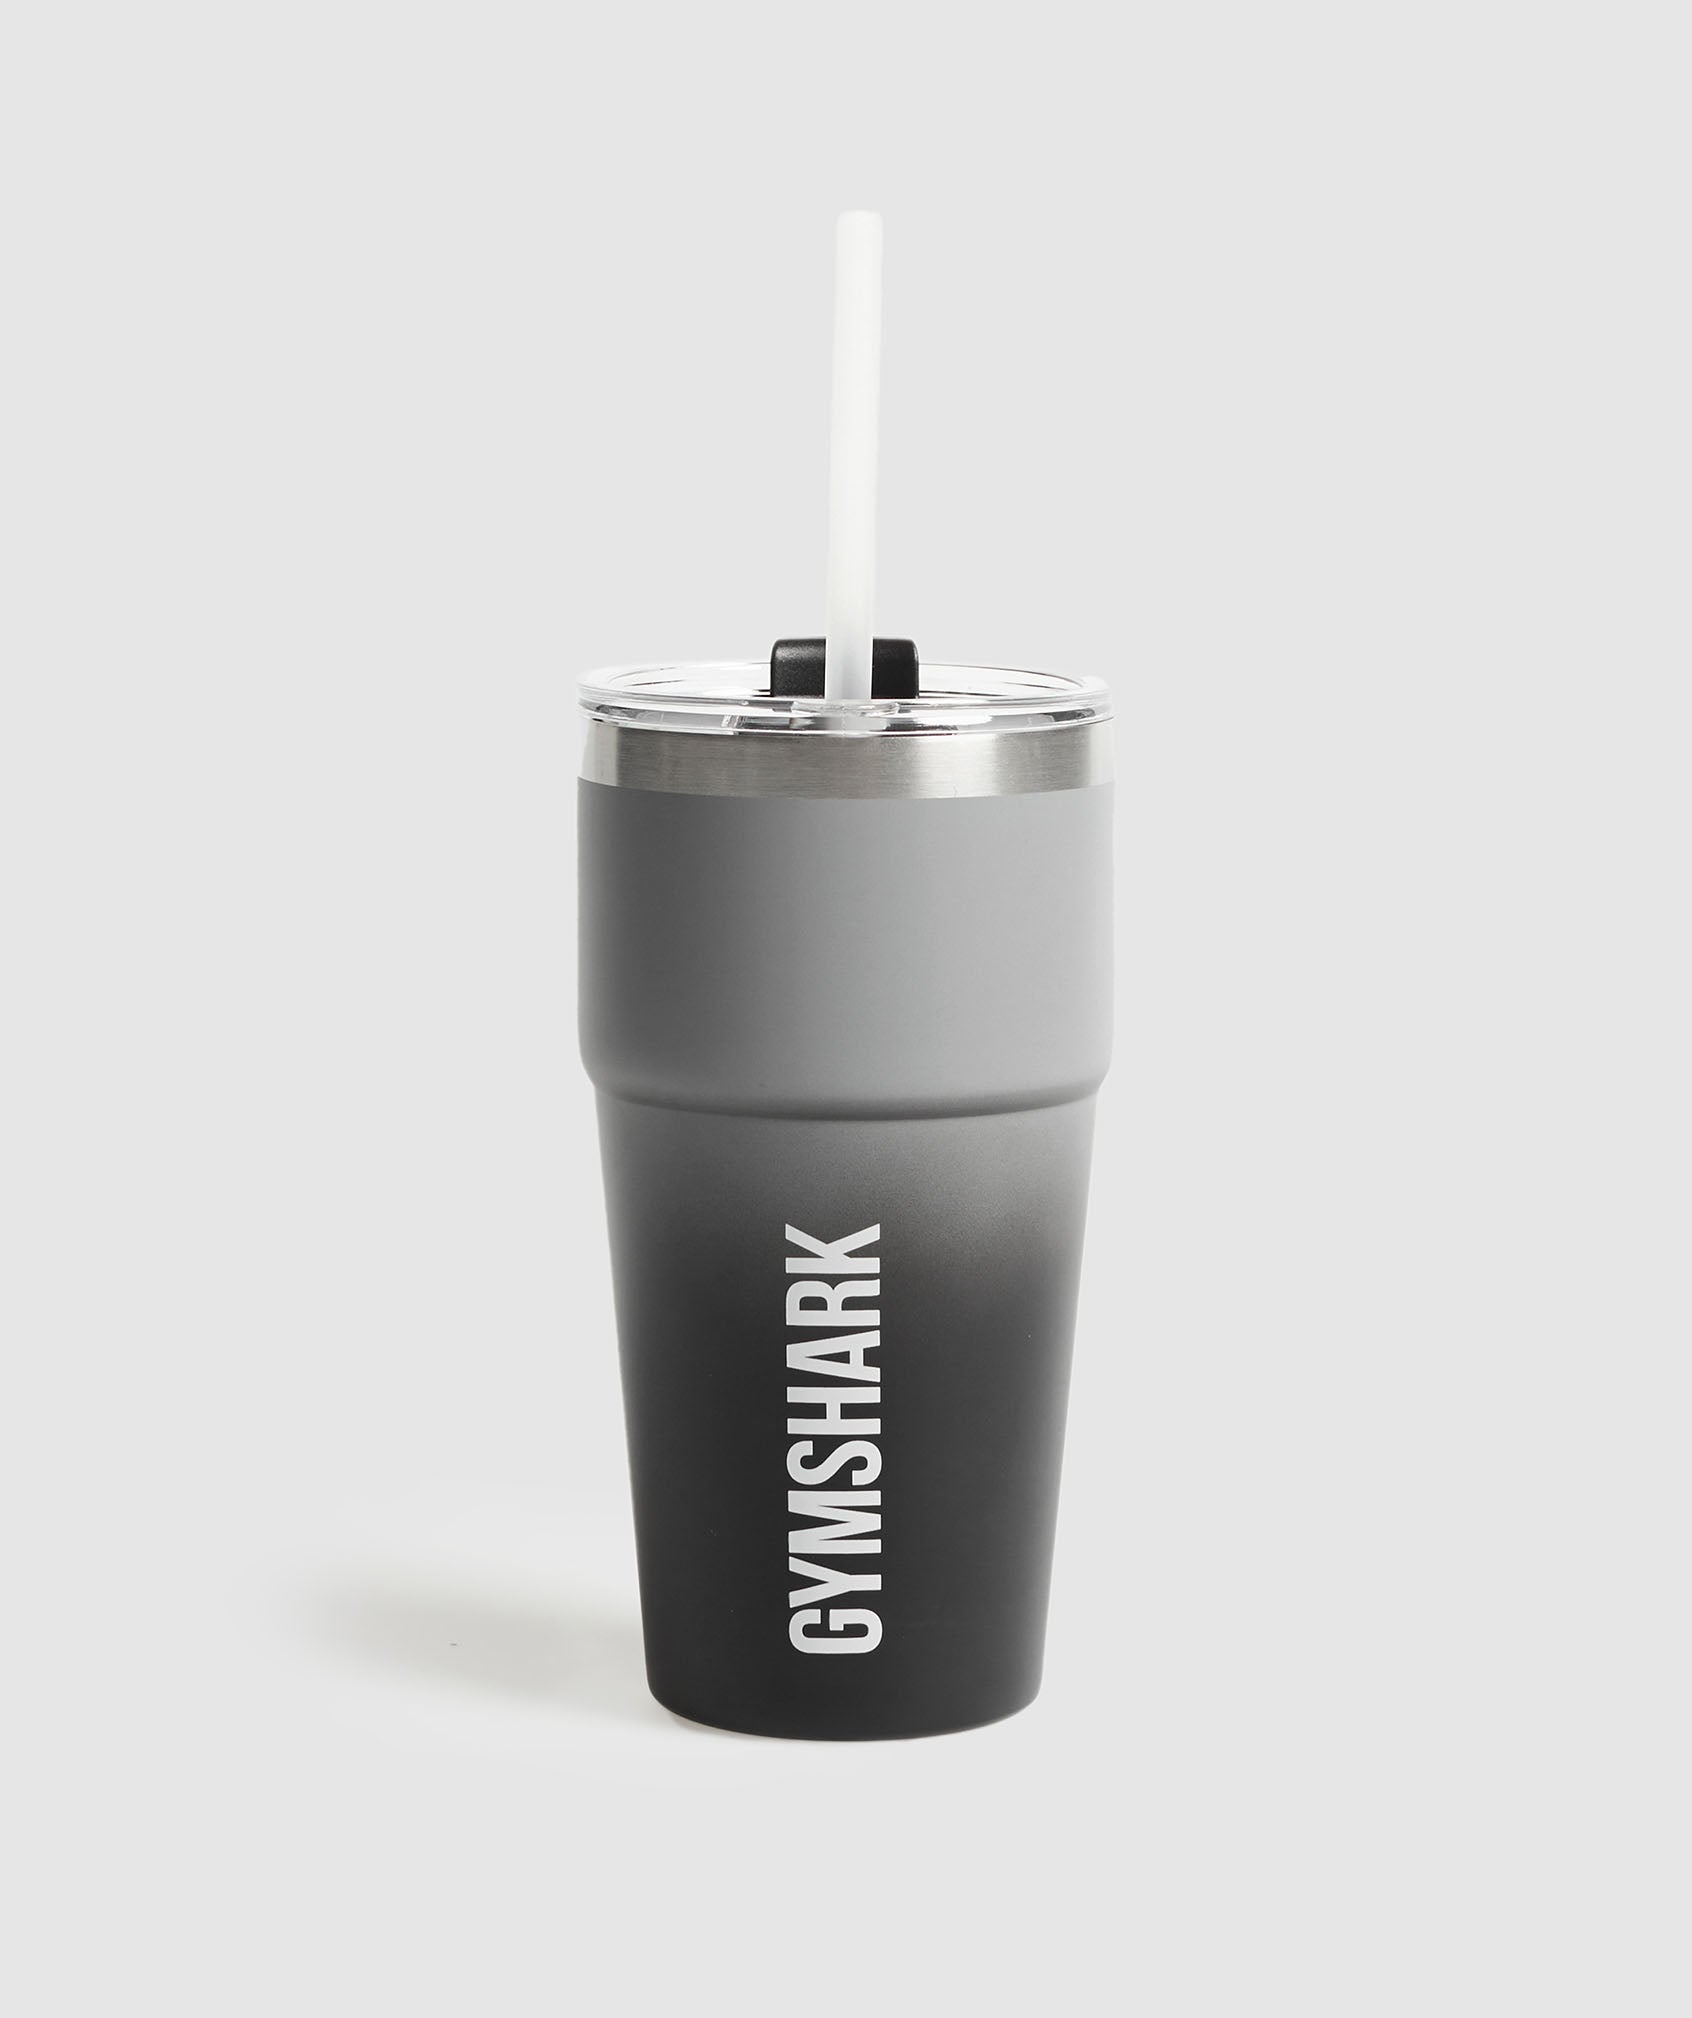 Insulated Straw Cup in Smokey Grey/Black is out of stock